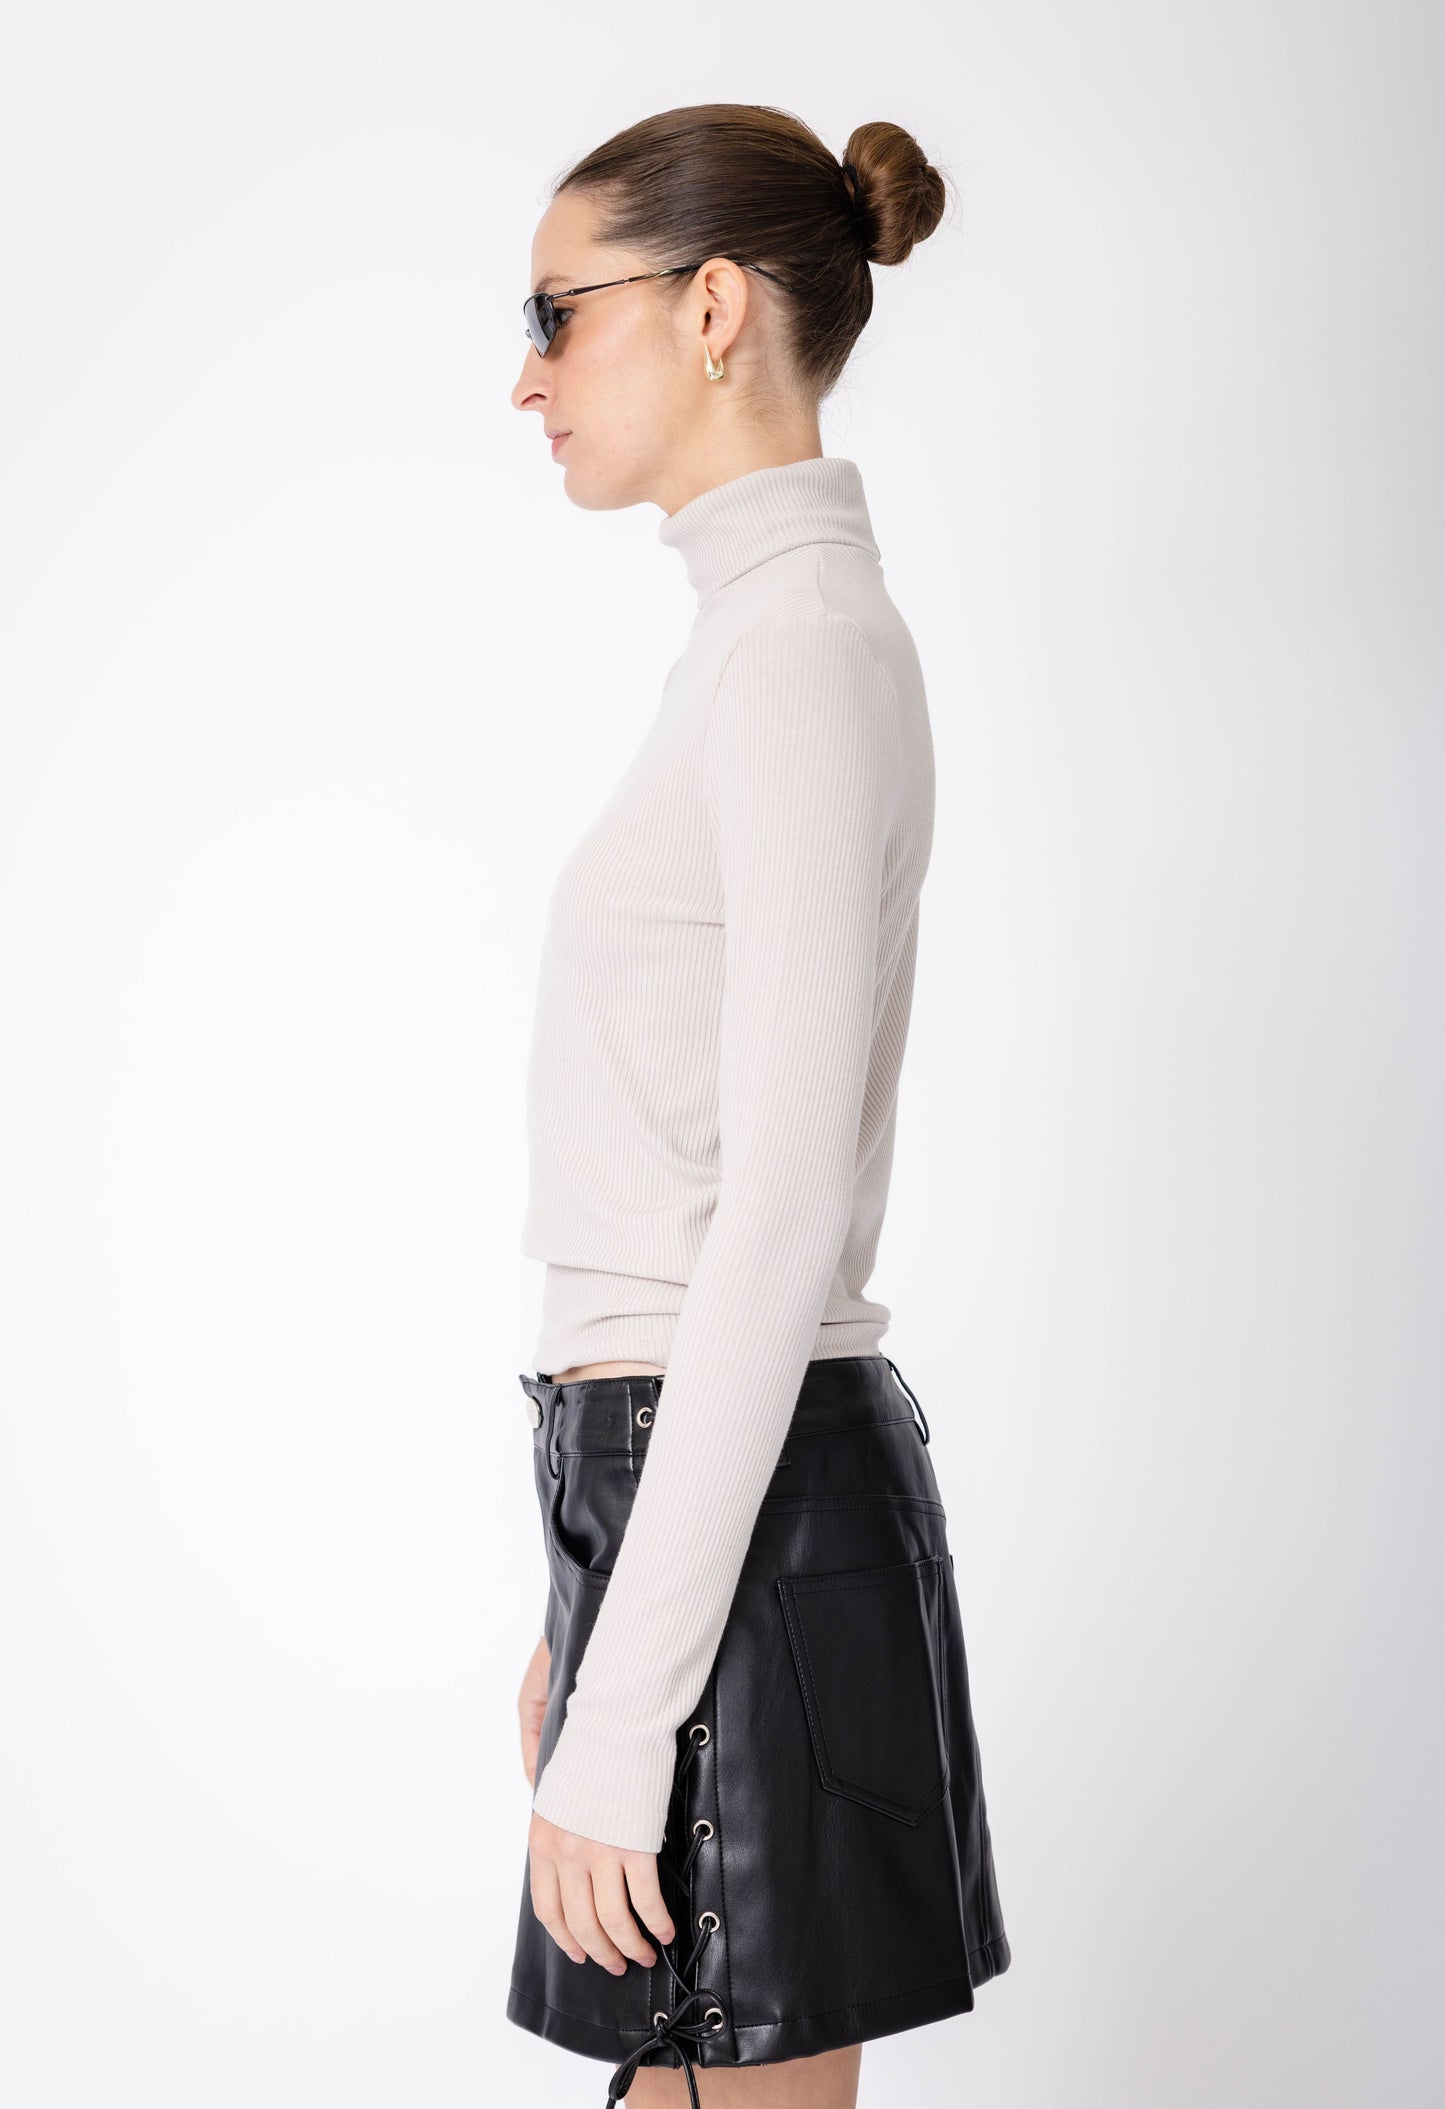 Ribbed Turtleneck in Mauve